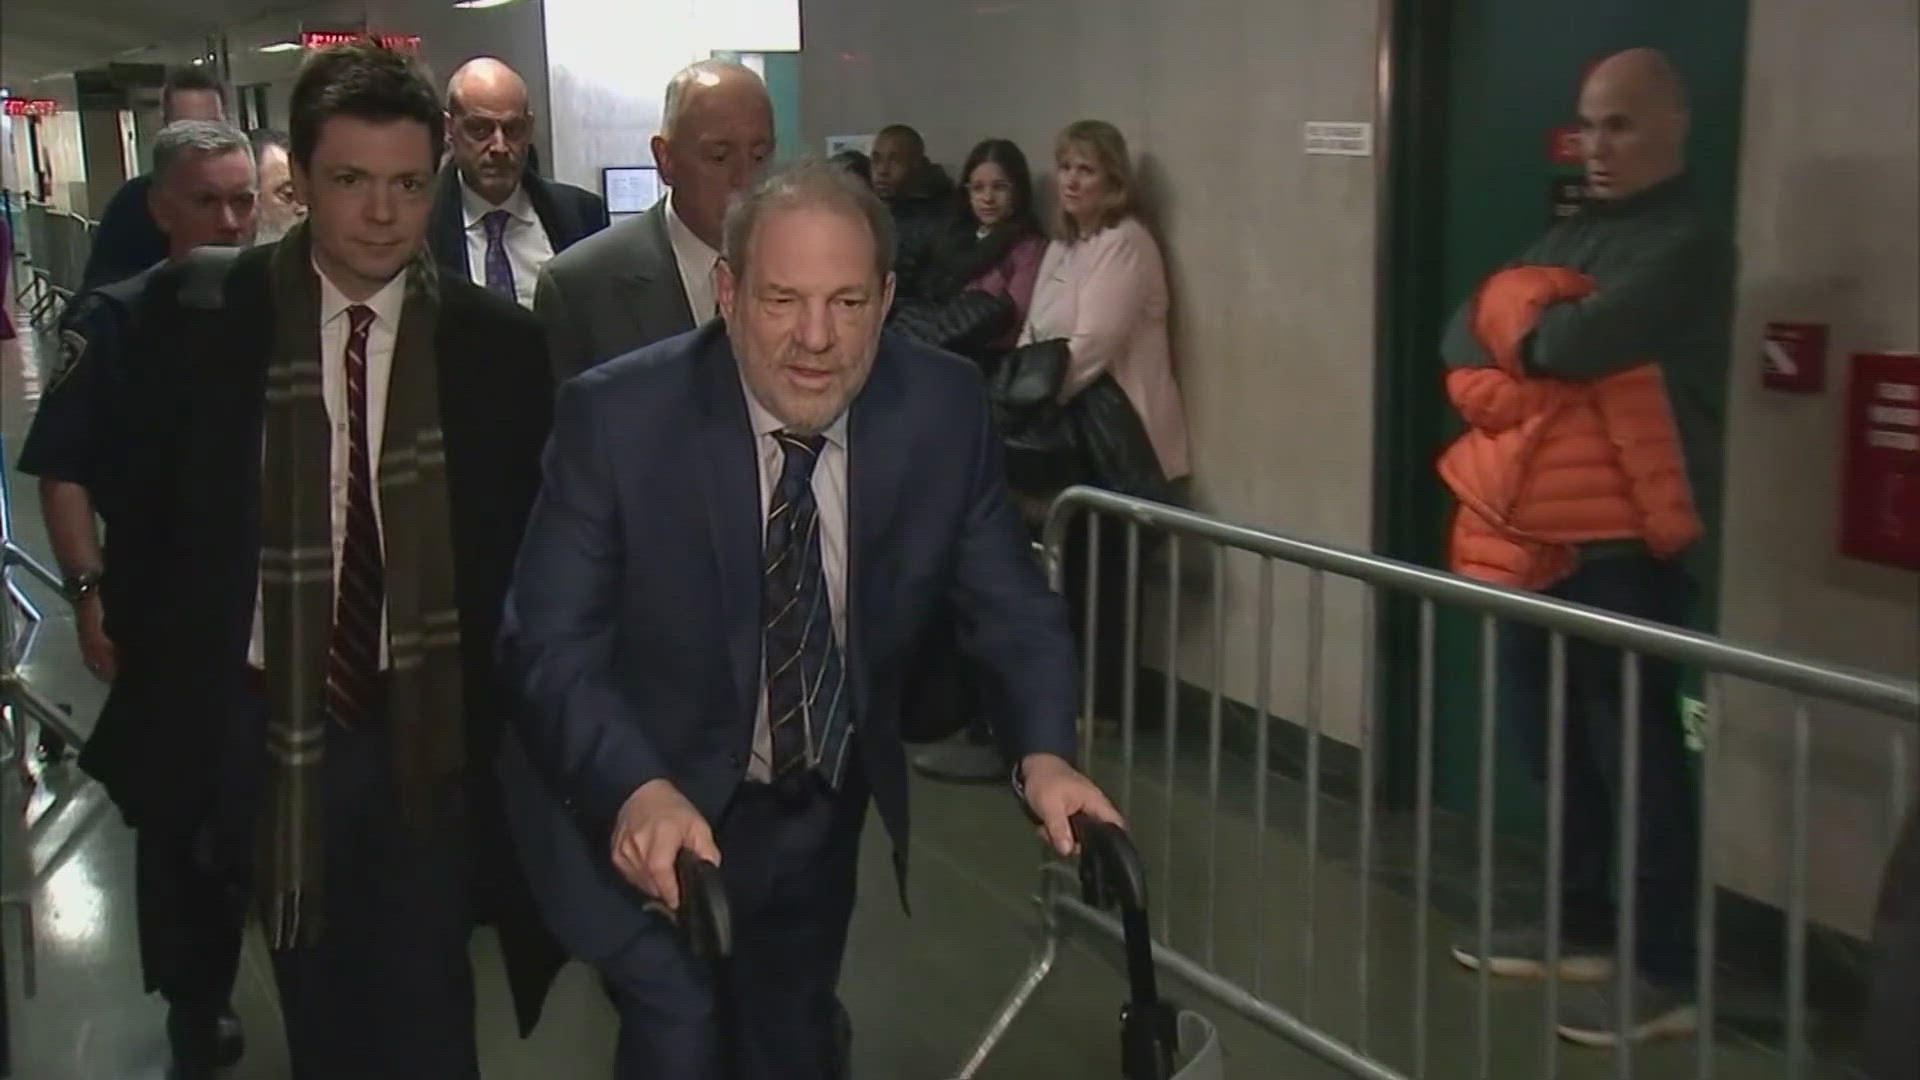 While the New York conviction was thrown out, Weinstein will remain in prison because he was convicted in Los Angeles of another rape and sentenced to 16 years.